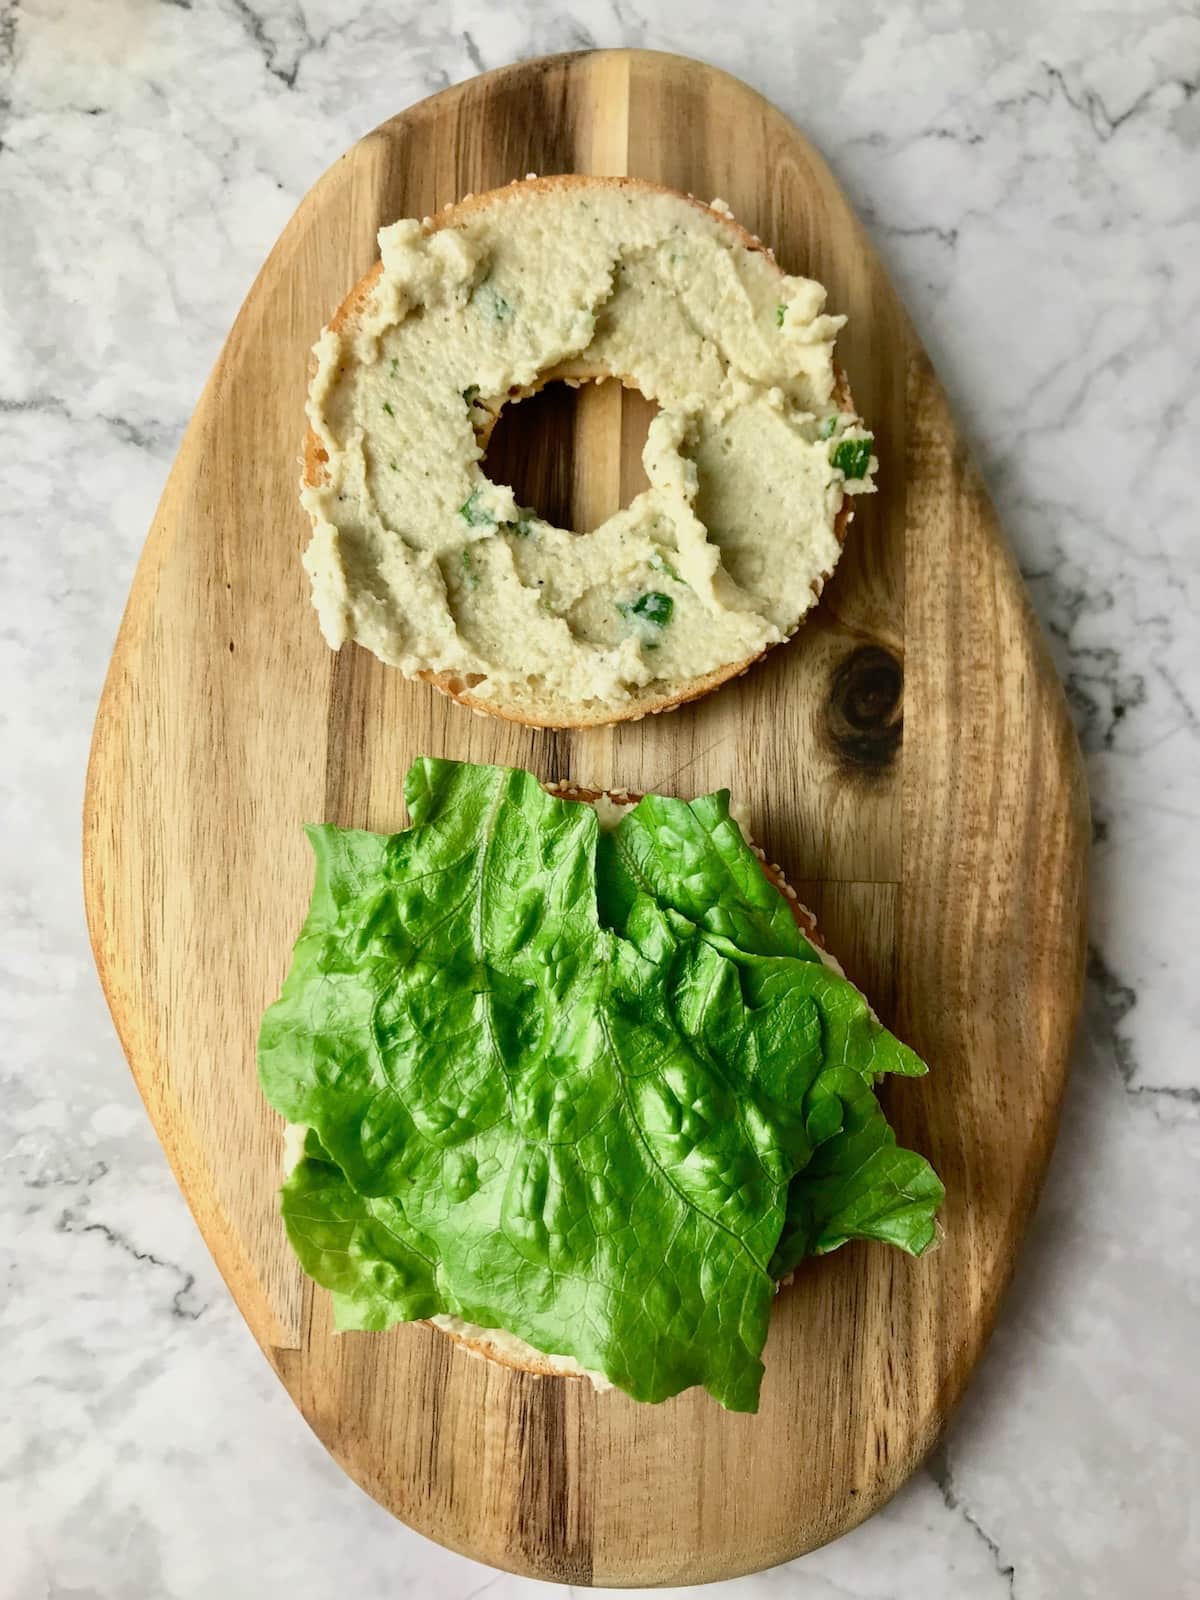 A bagel slice topped with cream cheese and another slice topped with lettuce.